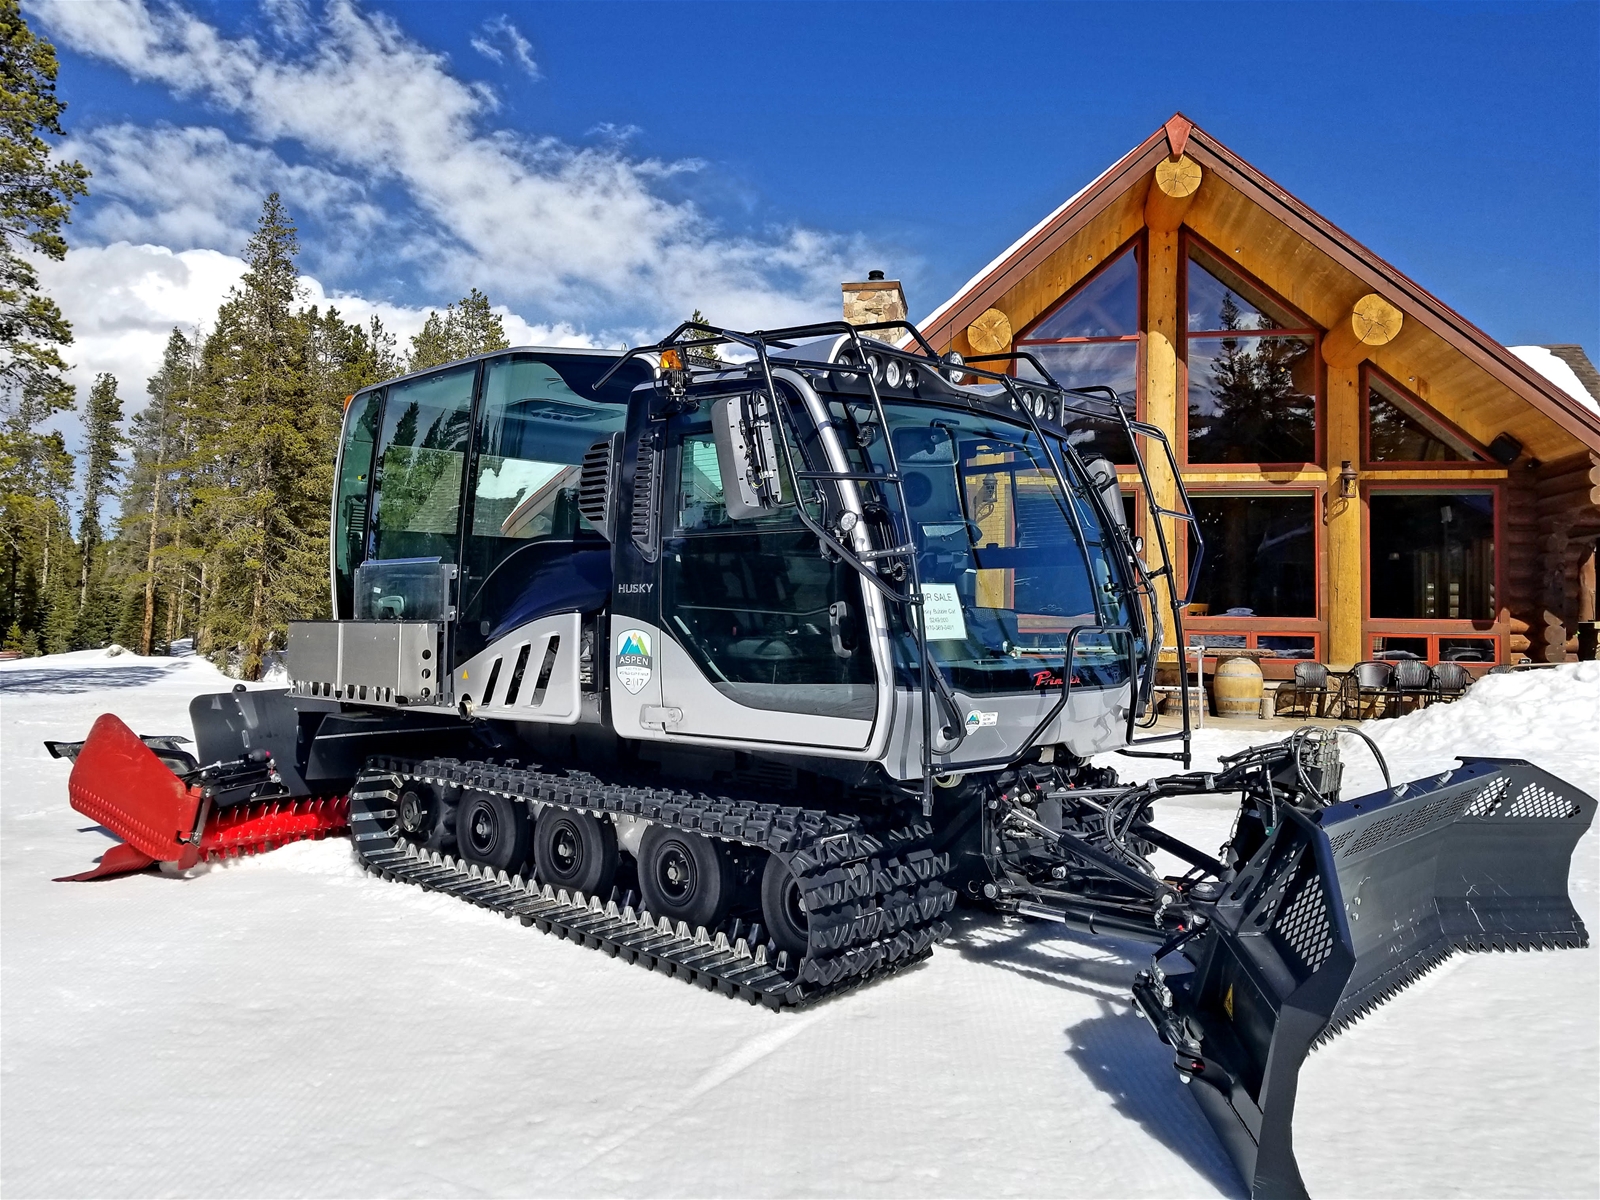 Breckenridge Snow Cat Tours and Skiing